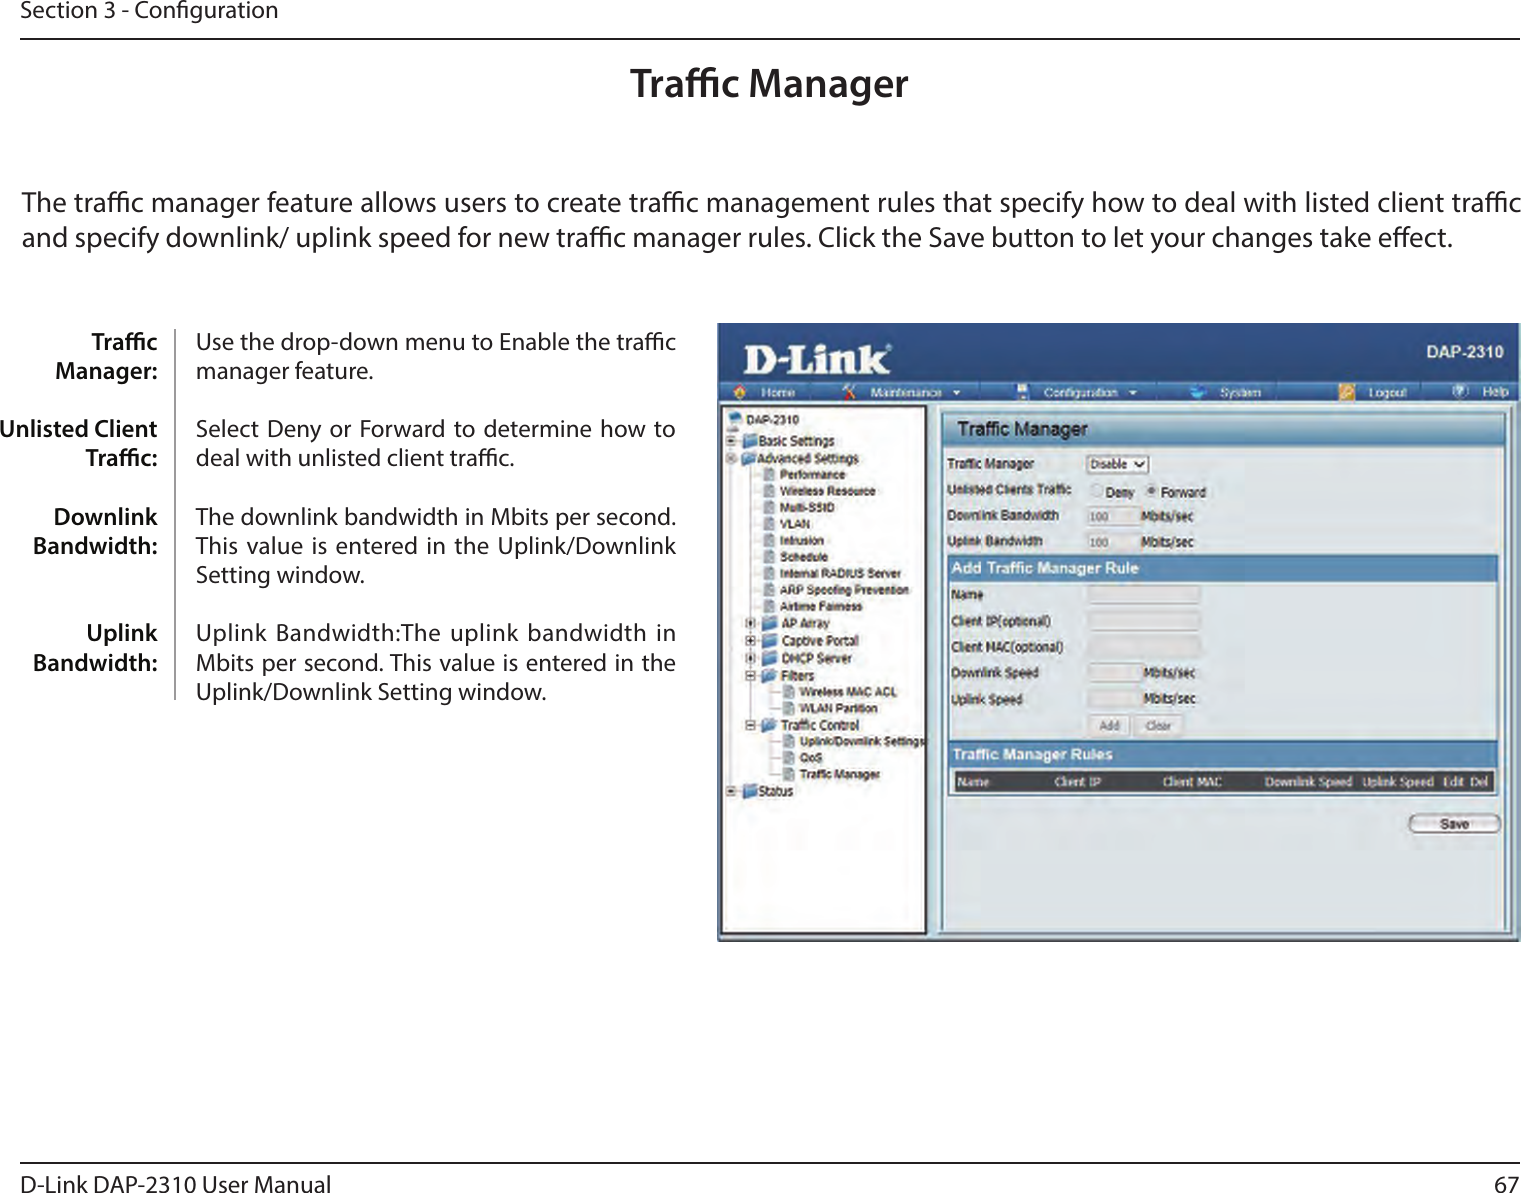 67D-Link DAP-2310 User ManualSection 3 - CongurationTrac ManagerThe trac manager feature allows users to create trac management rules that specify how to deal with listed client trac and specify downlink/ uplink speed for new trac manager rules. Click the Save button to let your changes take eect.Trac Manager: Unlisted Client Trac: Downlink Bandwidth: Uplink Bandwidth:Use the drop-down menu to Enable the trac manager feature. Select  Deny or Forward to determine how to deal with unlisted client trac. The downlink bandwidth in Mbits per second. This value is entered in  the Uplink/Downlink Setting window. Uplink Bandwidth:The uplink bandwidth  in Mbits per second. This value is entered in the Uplink/Downlink Setting window.